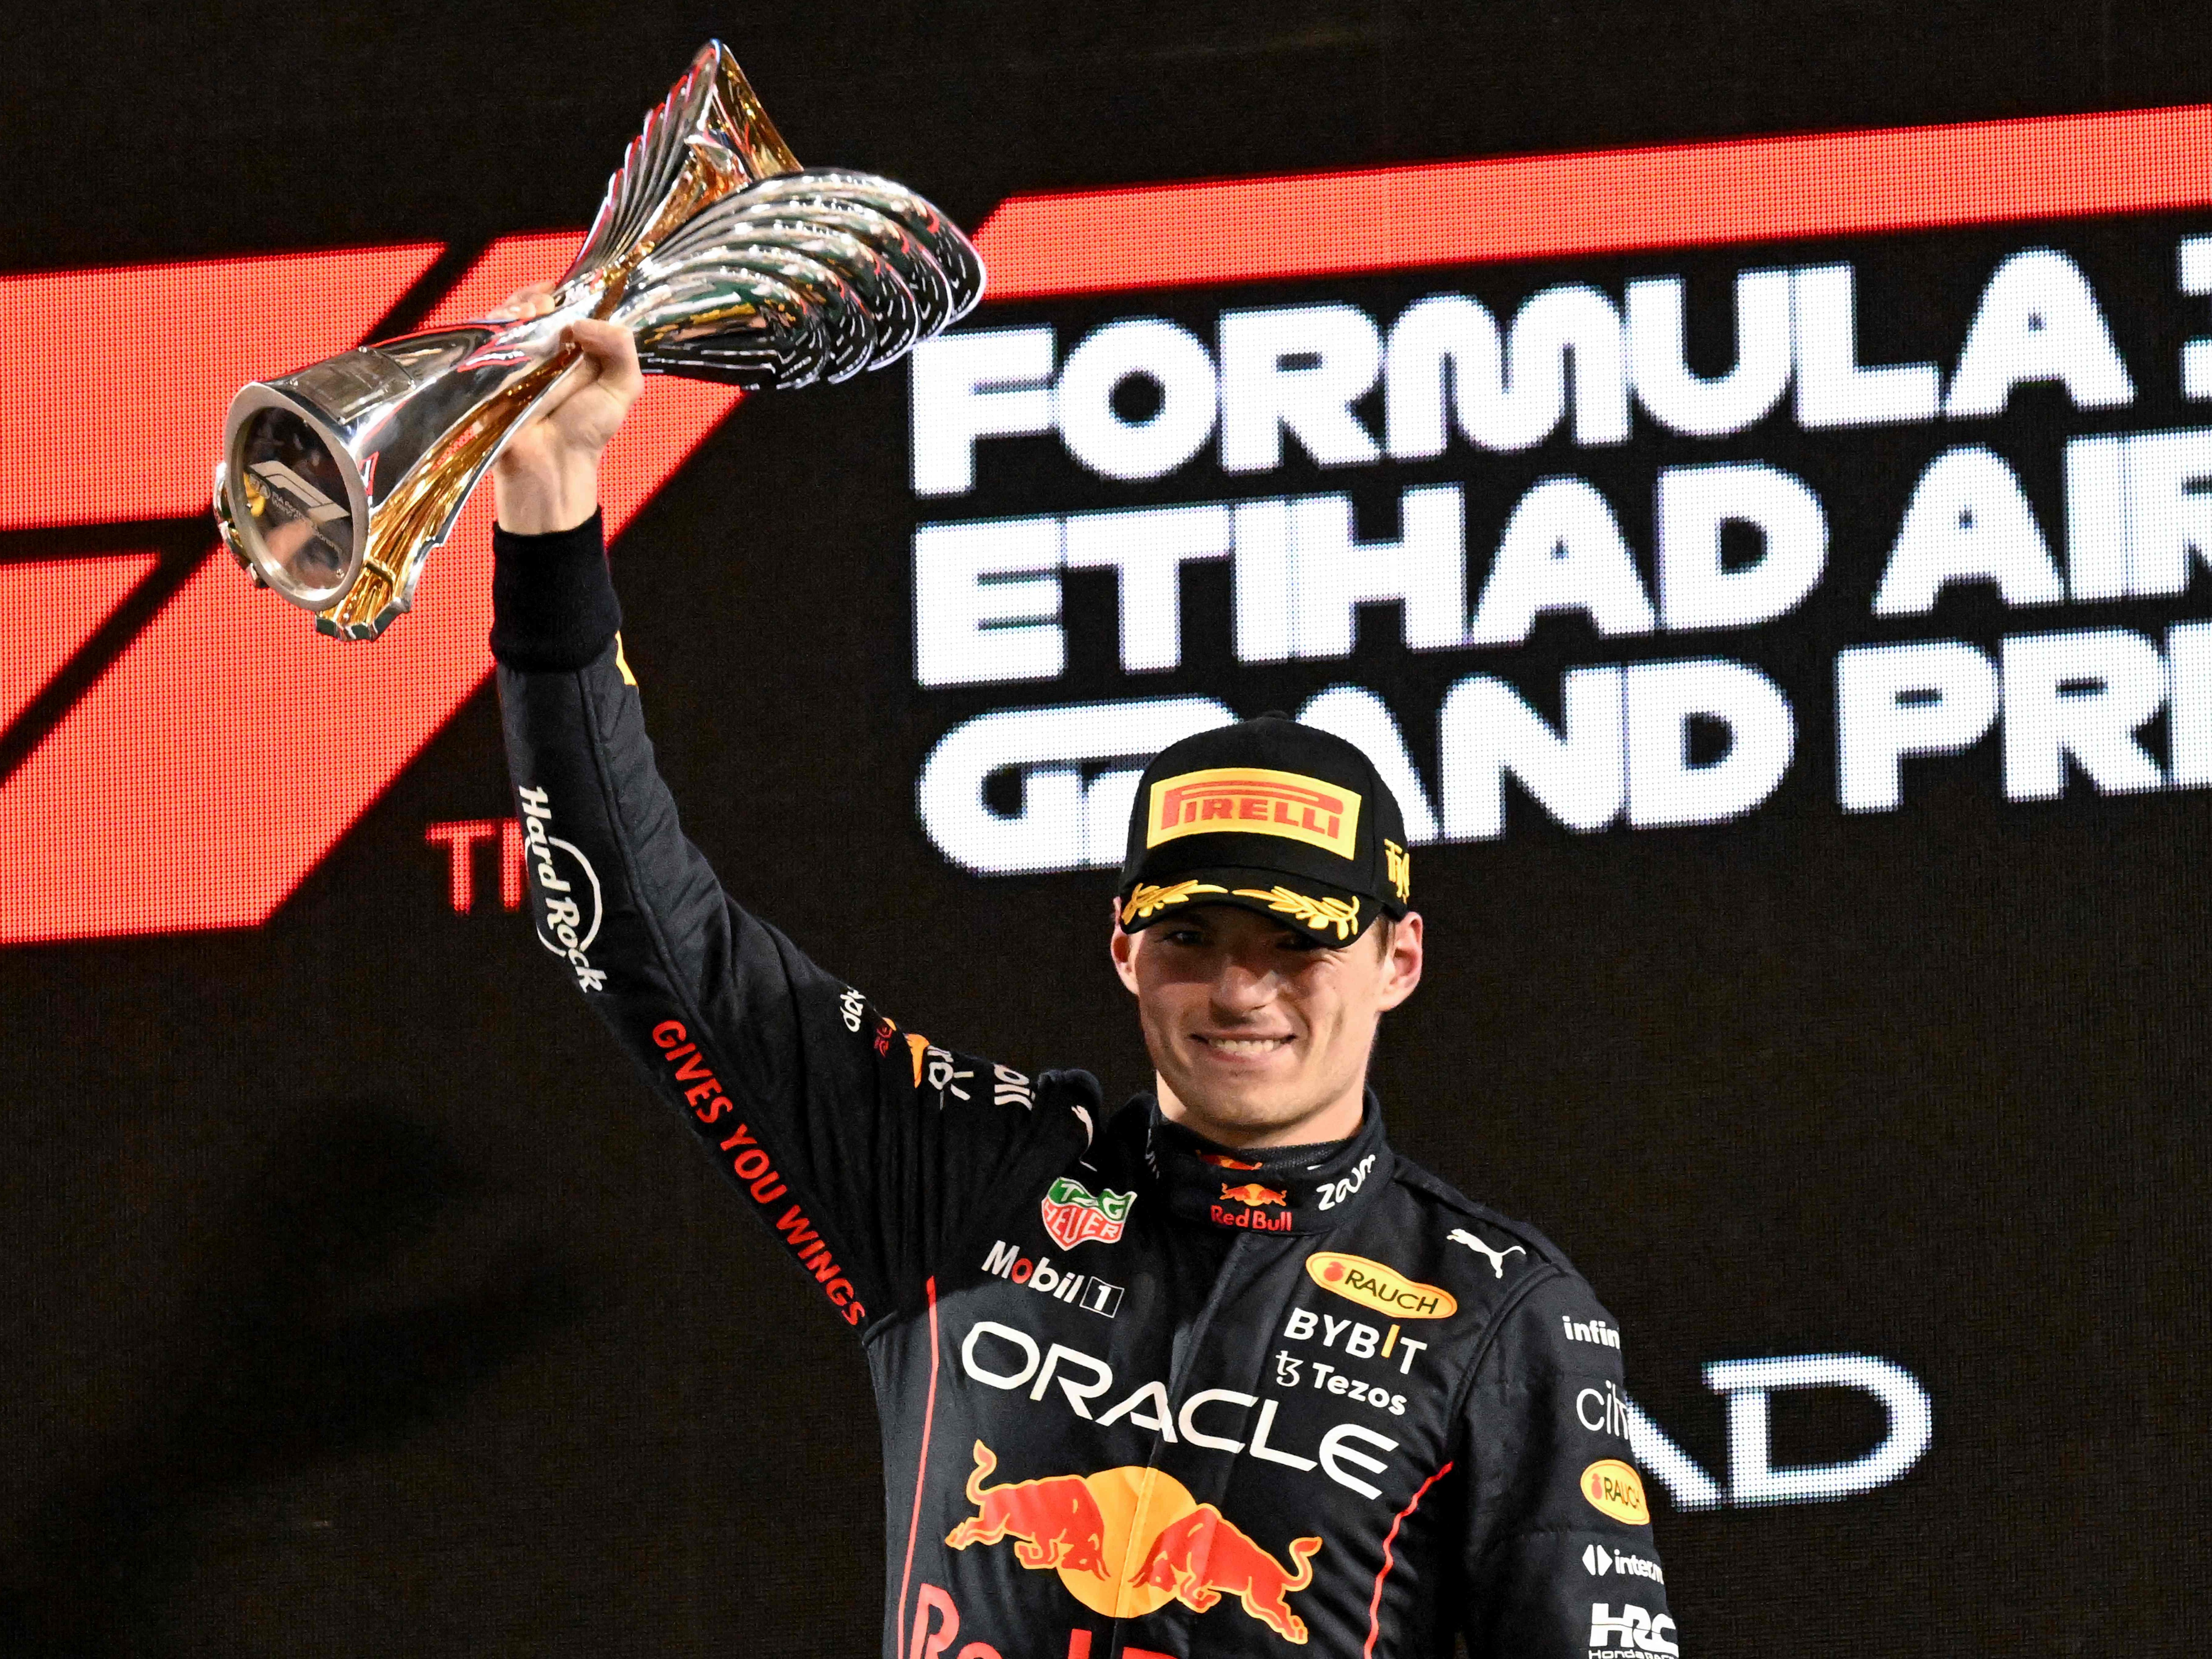 Abu Dhabi GP LIVE F1 updates as Max Verstappen wins after Lewis Hamilton retires The Independent